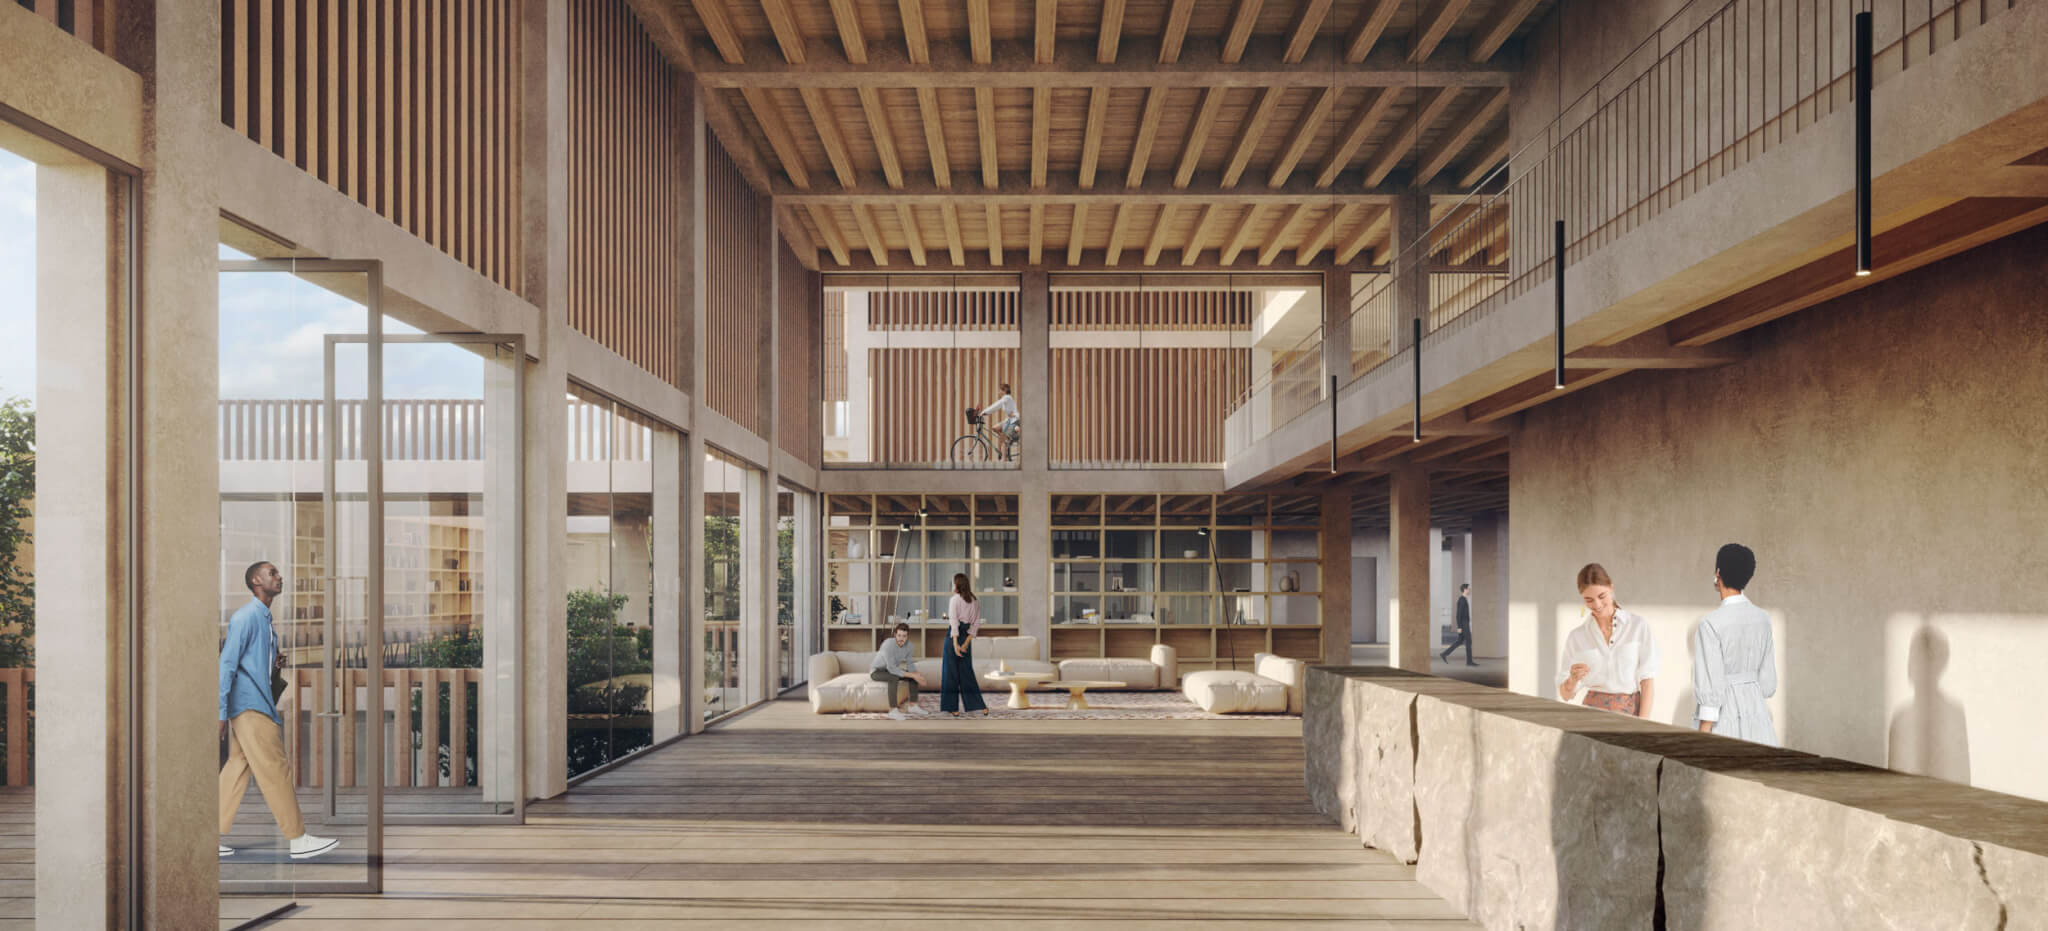 rendering of interior with wood and beige materials